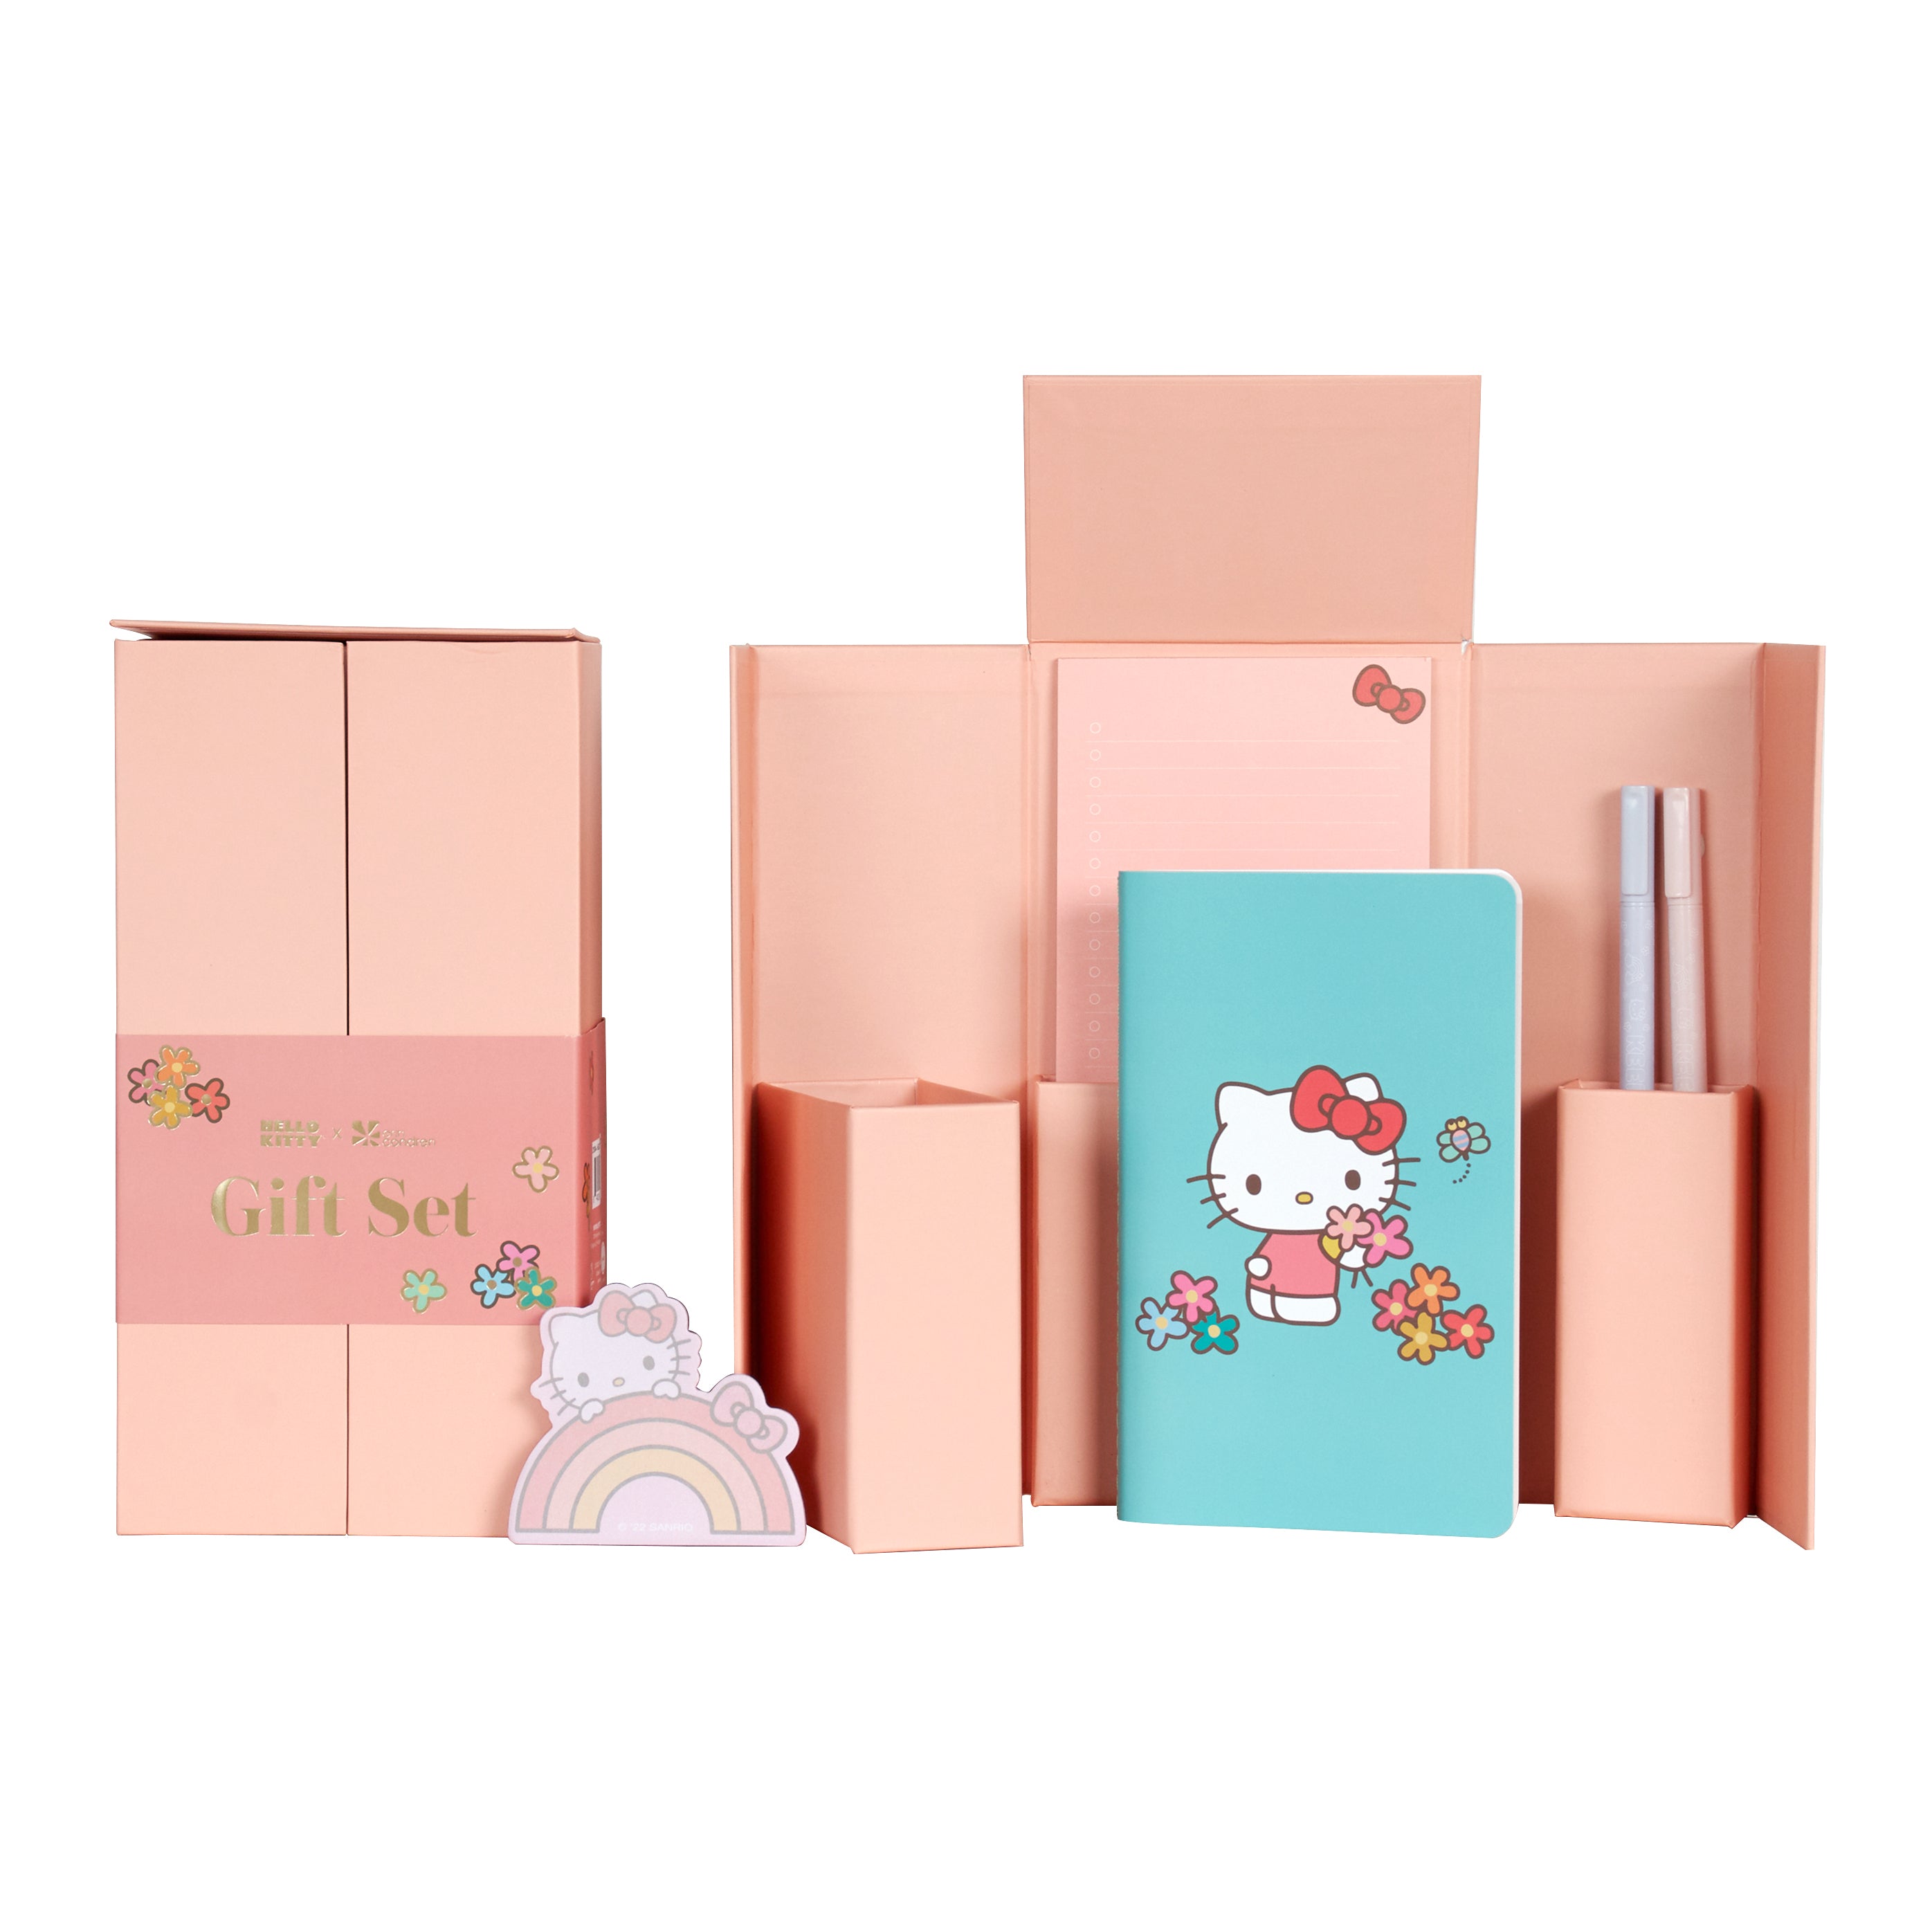 Galerie Candy & Gifts Happy Anniversary Gift Box